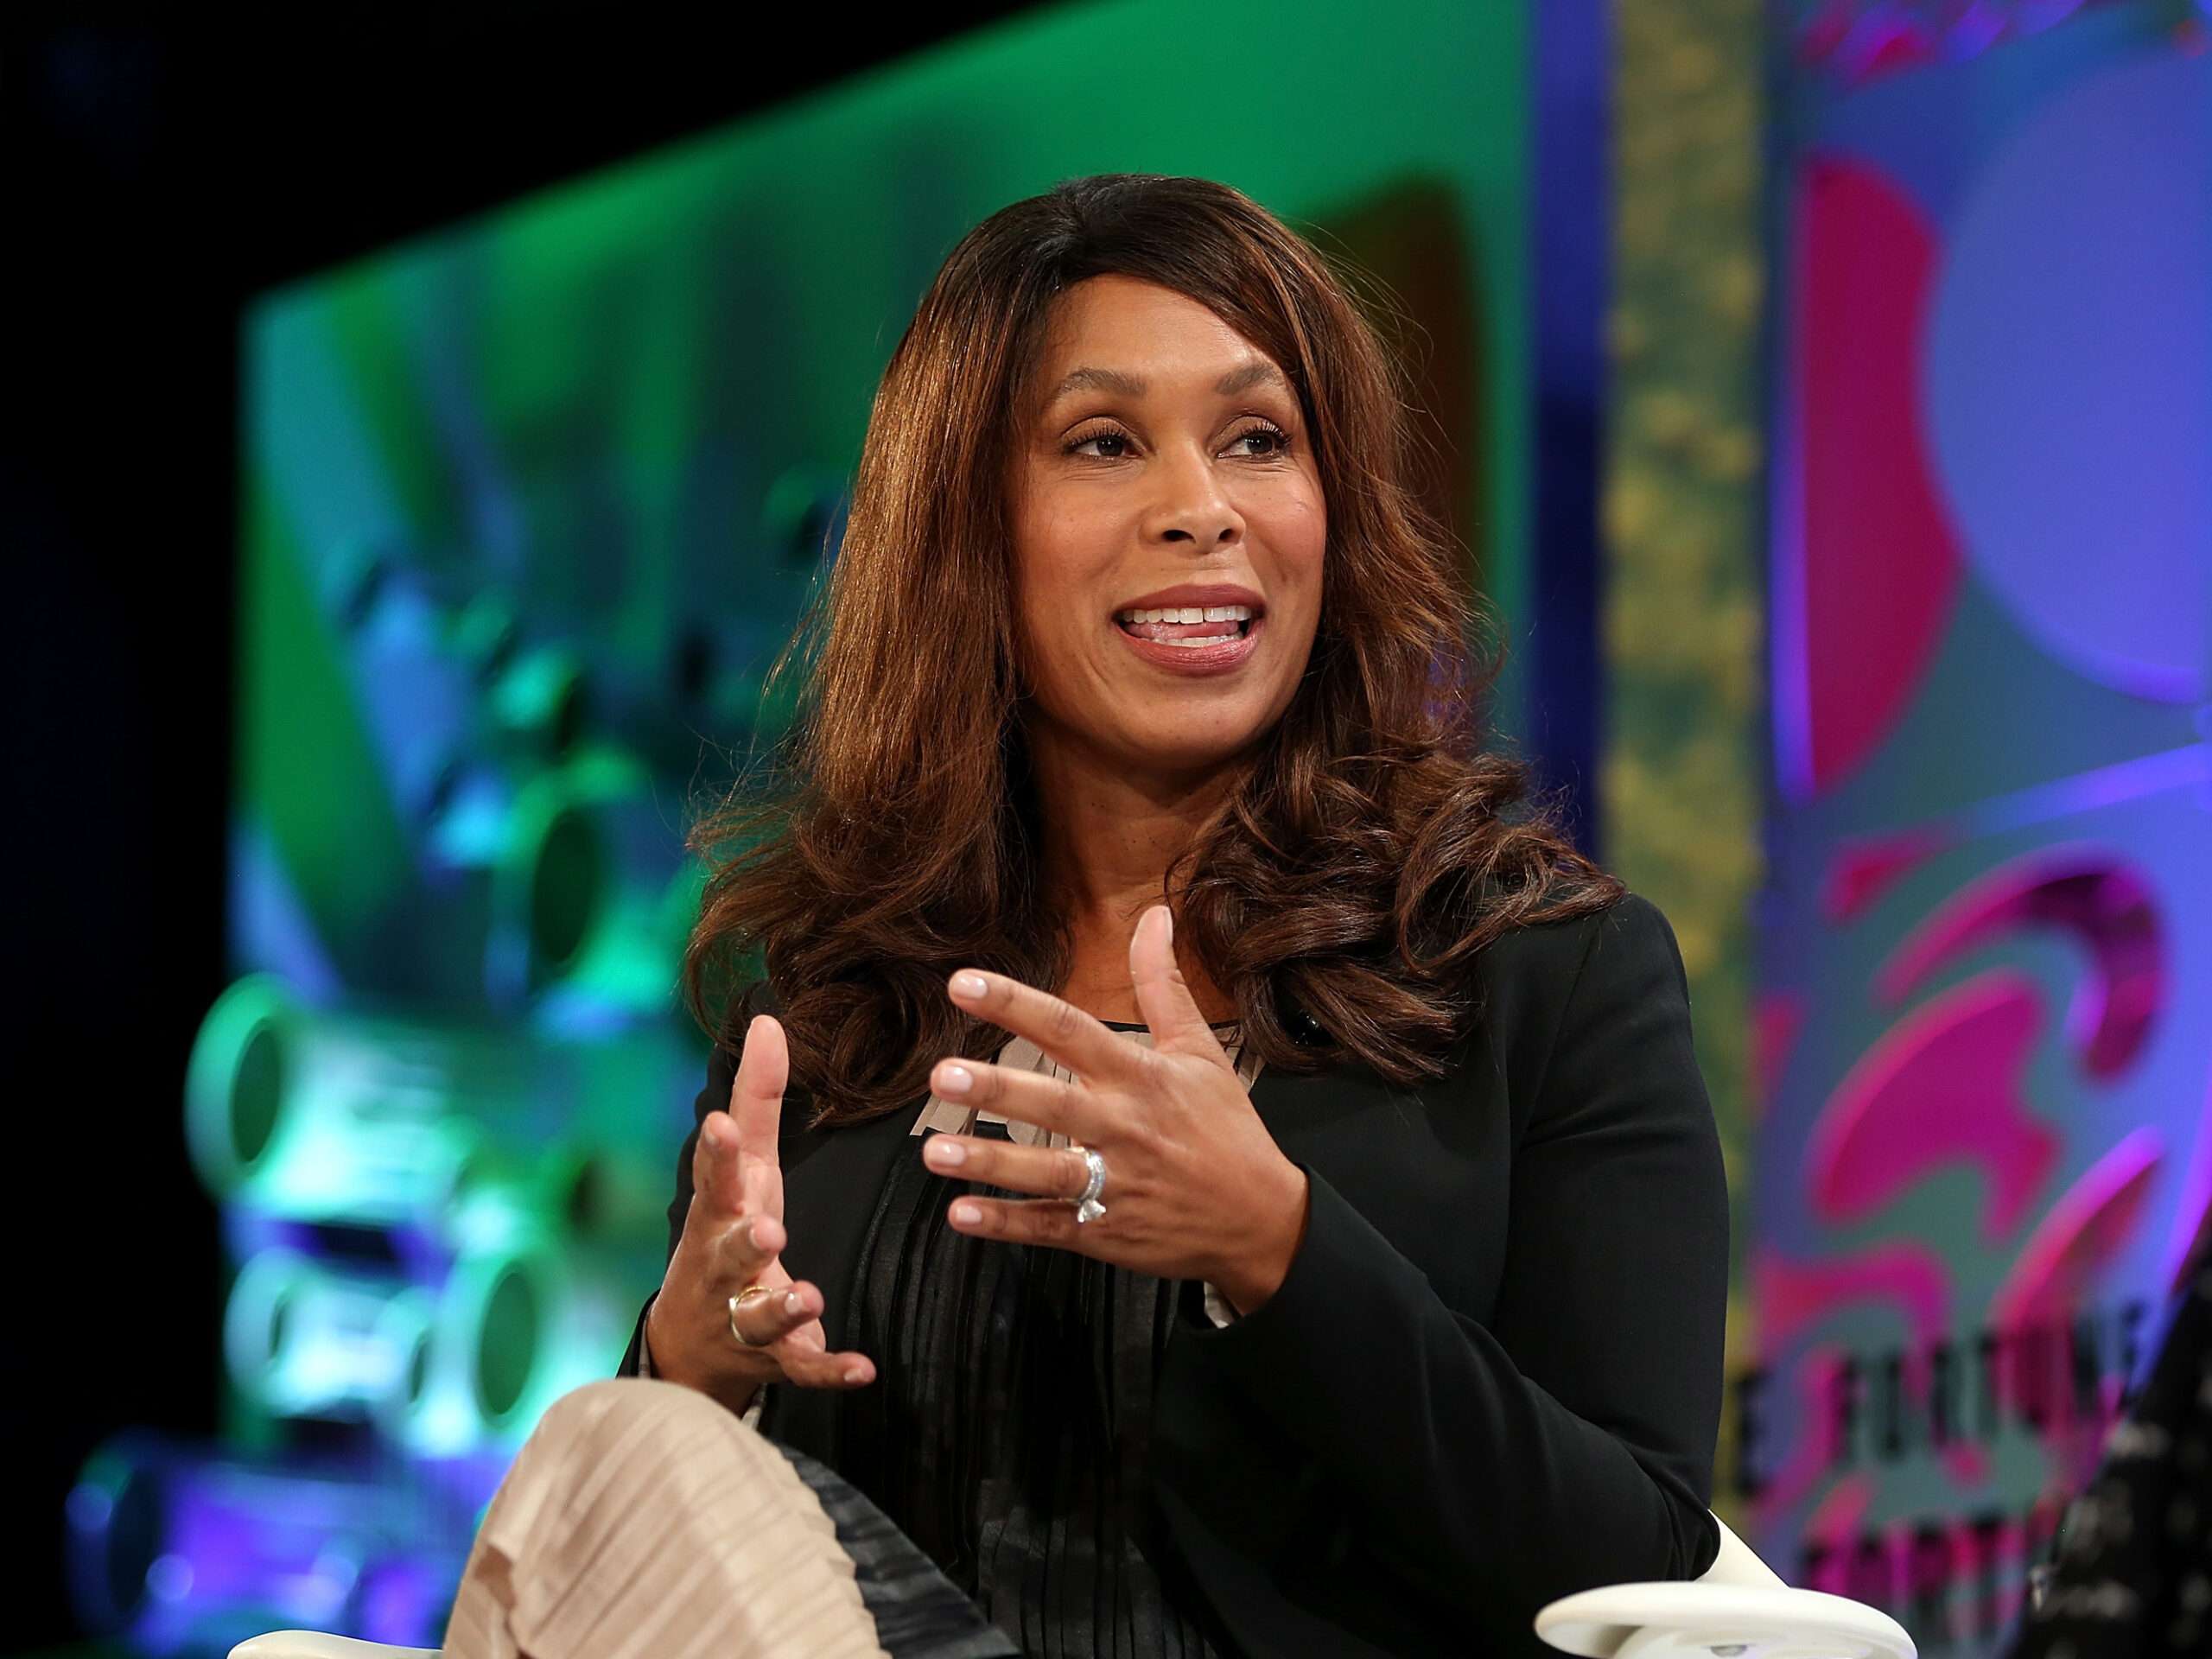 Channing Dungey Biography: Age, Net Worth, Spouse, Family, Warner Bros., Children, Movies